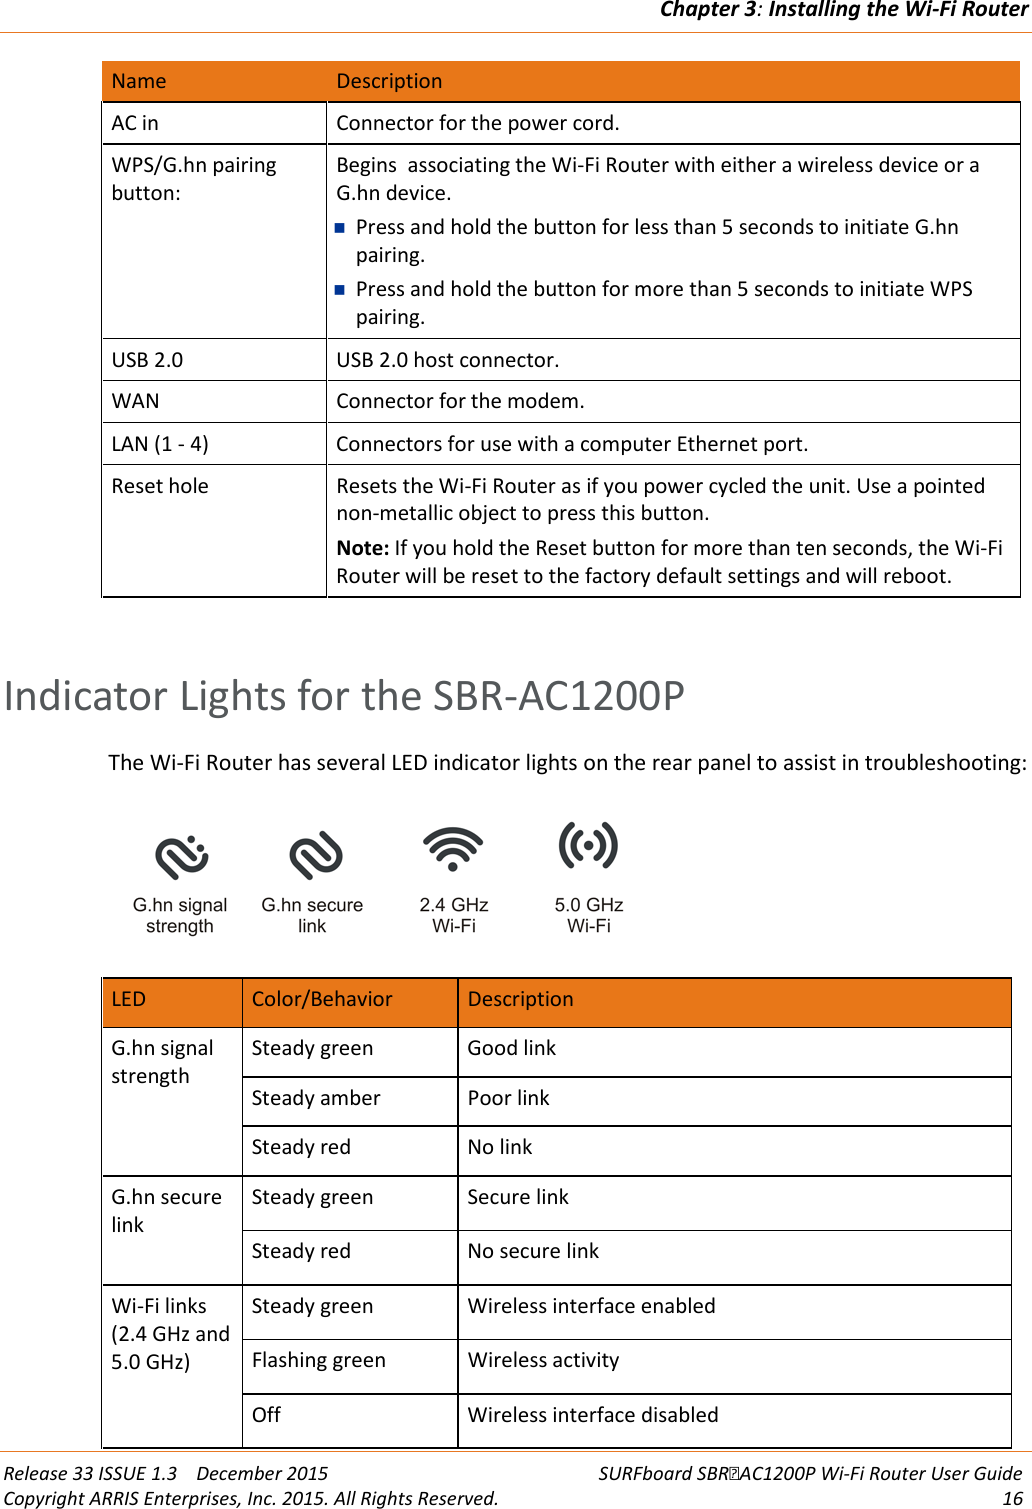 Chapter 3: Installing the Wi-Fi Router  Release 33 ISSUE 1.3    December 2015 SURFboard SBRAC1200P Wi-Fi Router User Guide Copyright ARRIS Enterprises, Inc. 2015. All Rights Reserved. 16  Name Description AC in Connector for the power cord. WPS/G.hn pairing button: Begins  associating the Wi-Fi Router with either a wireless device or a G.hn device.  Press and hold the button for less than 5 seconds to initiate G.hn pairing.  Press and hold the button for more than 5 seconds to initiate WPS pairing. USB 2.0 USB 2.0 host connector. WAN Connector for the modem. LAN (1 - 4) Connectors for use with a computer Ethernet port. Reset hole Resets the Wi-Fi Router as if you power cycled the unit. Use a pointed non-metallic object to press this button. Note: If you hold the Reset button for more than ten seconds, the Wi-Fi Router will be reset to the factory default settings and will reboot.    Indicator Lights for the SBR-AC1200P The Wi-Fi Router has several LED indicator lights on the rear panel to assist in troubleshooting:  LED Color/Behavior Description G.hn signal strength Steady green Good link Steady amber Poor link Steady red No link G.hn secure link Steady green Secure link Steady red No secure link Wi-Fi links (2.4 GHz and 5.0 GHz) Steady green Wireless interface enabled Flashing green Wireless activity Off Wireless interface disabled 